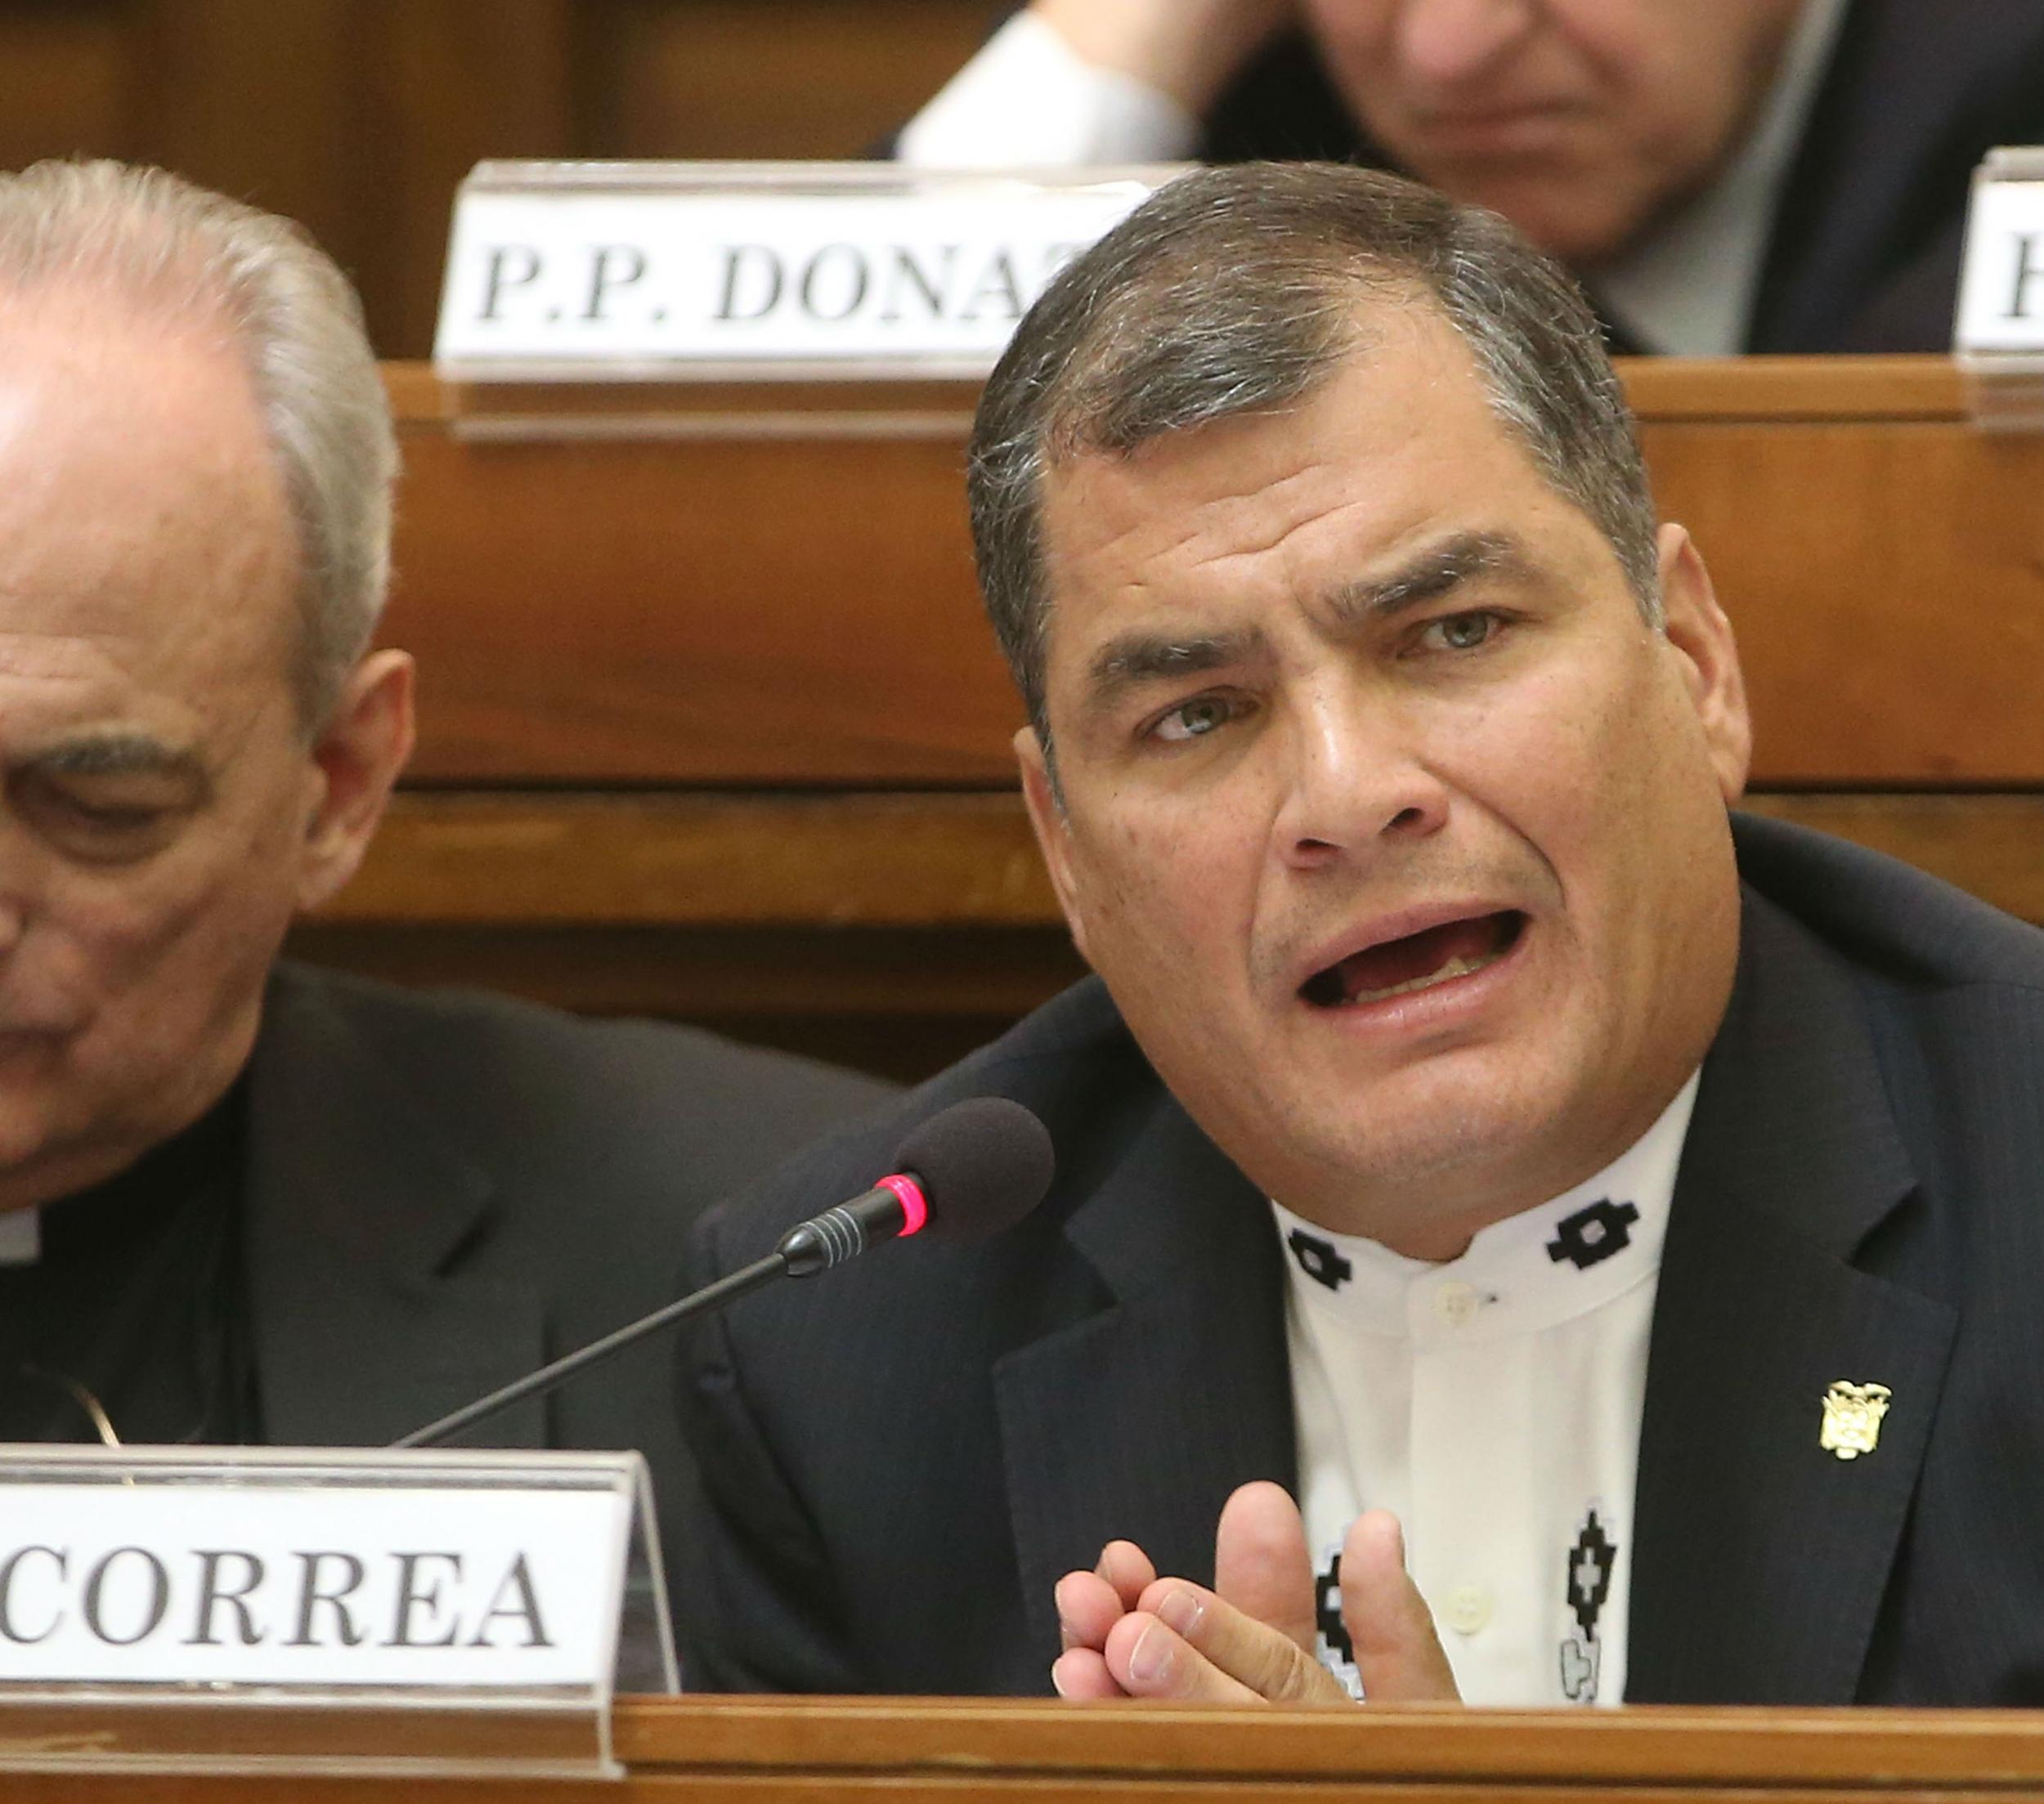 Mr Correa vowed to bring about a 'revolution against corruption' in 2007